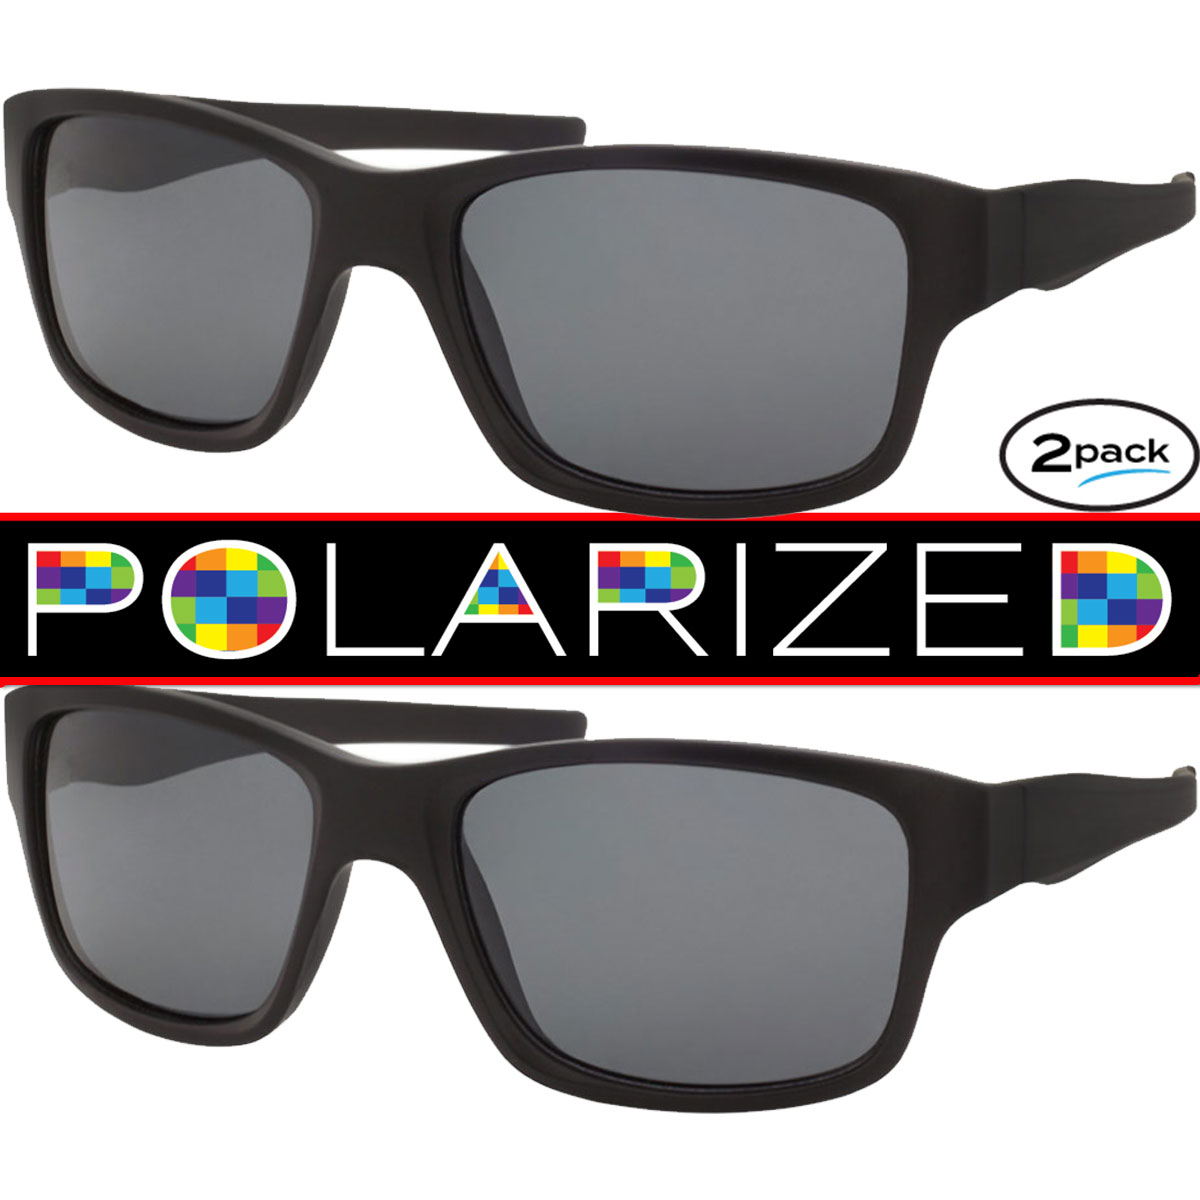 Mens Polarized Sunglasses 2 Pack All Black Sport Wrap Sunglass Style - image 1 of 5